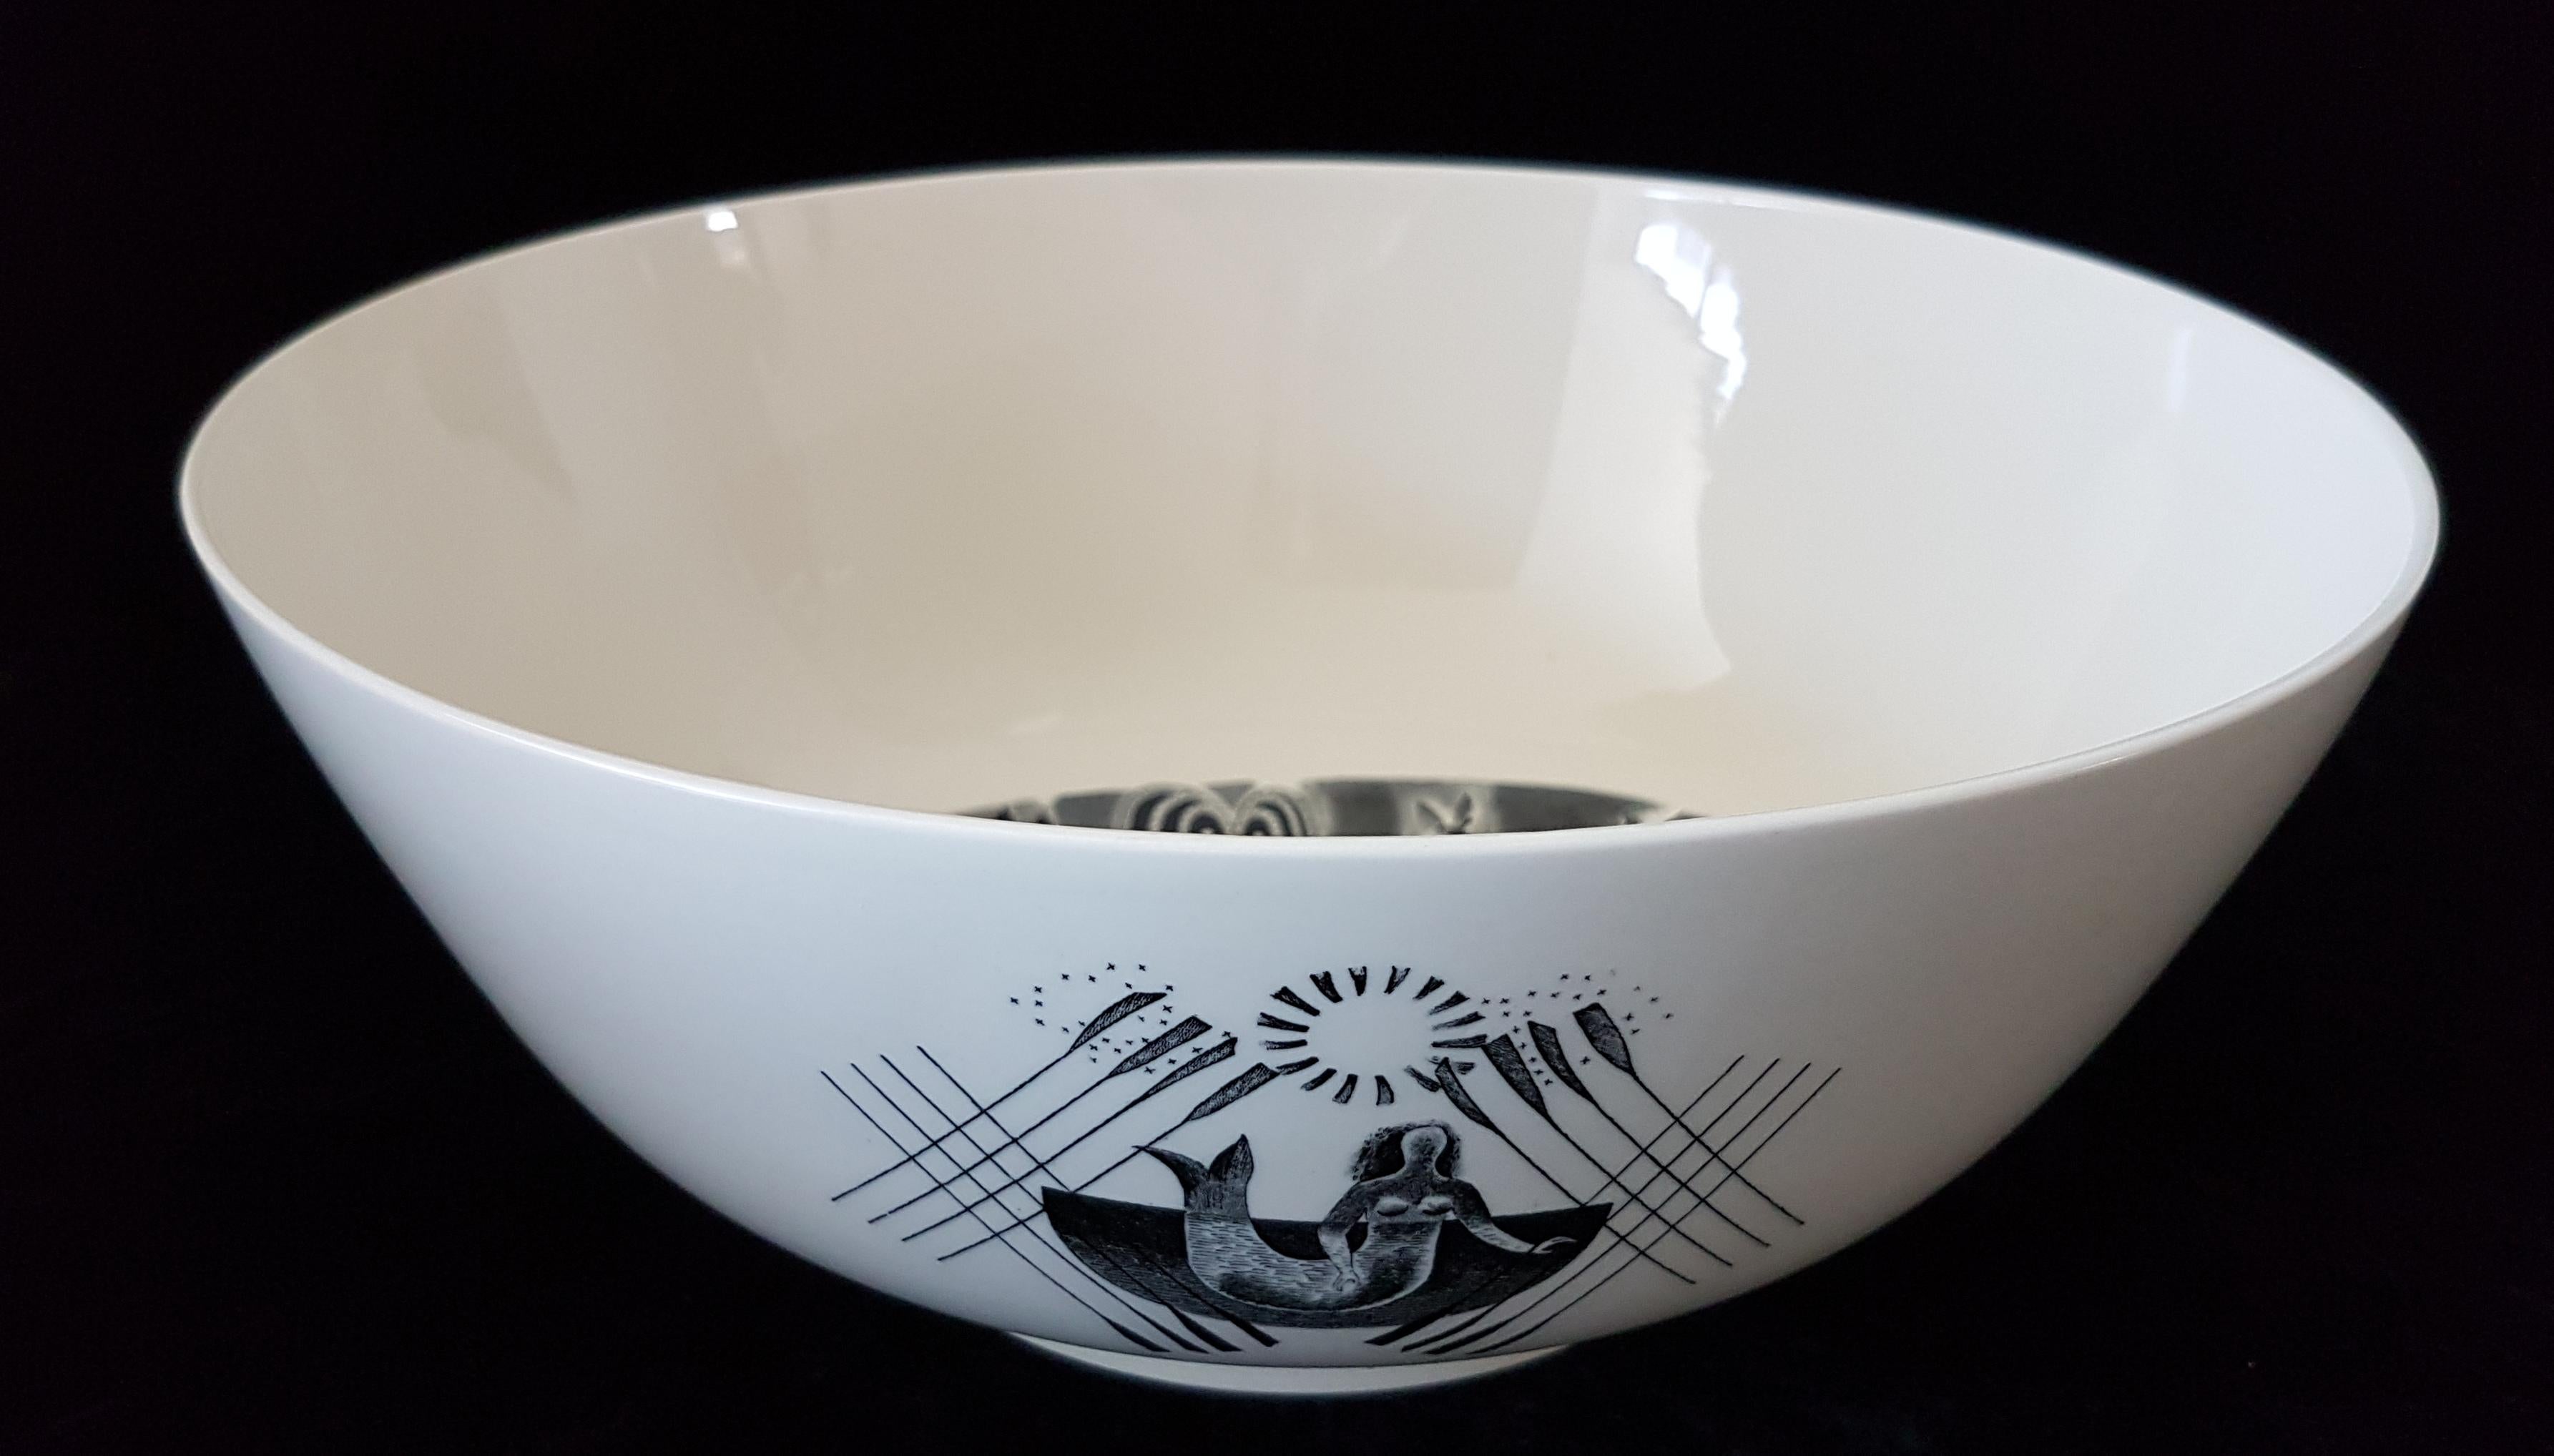 The 1973 re-issue of The Boat Race Bowl, designed by Eric Ravilous in the 1930s. His designs were not made by Wedgwood until the 1950s, on account of wartime restrictions. The artist died during that war, a sad loss to the art world. His designs are